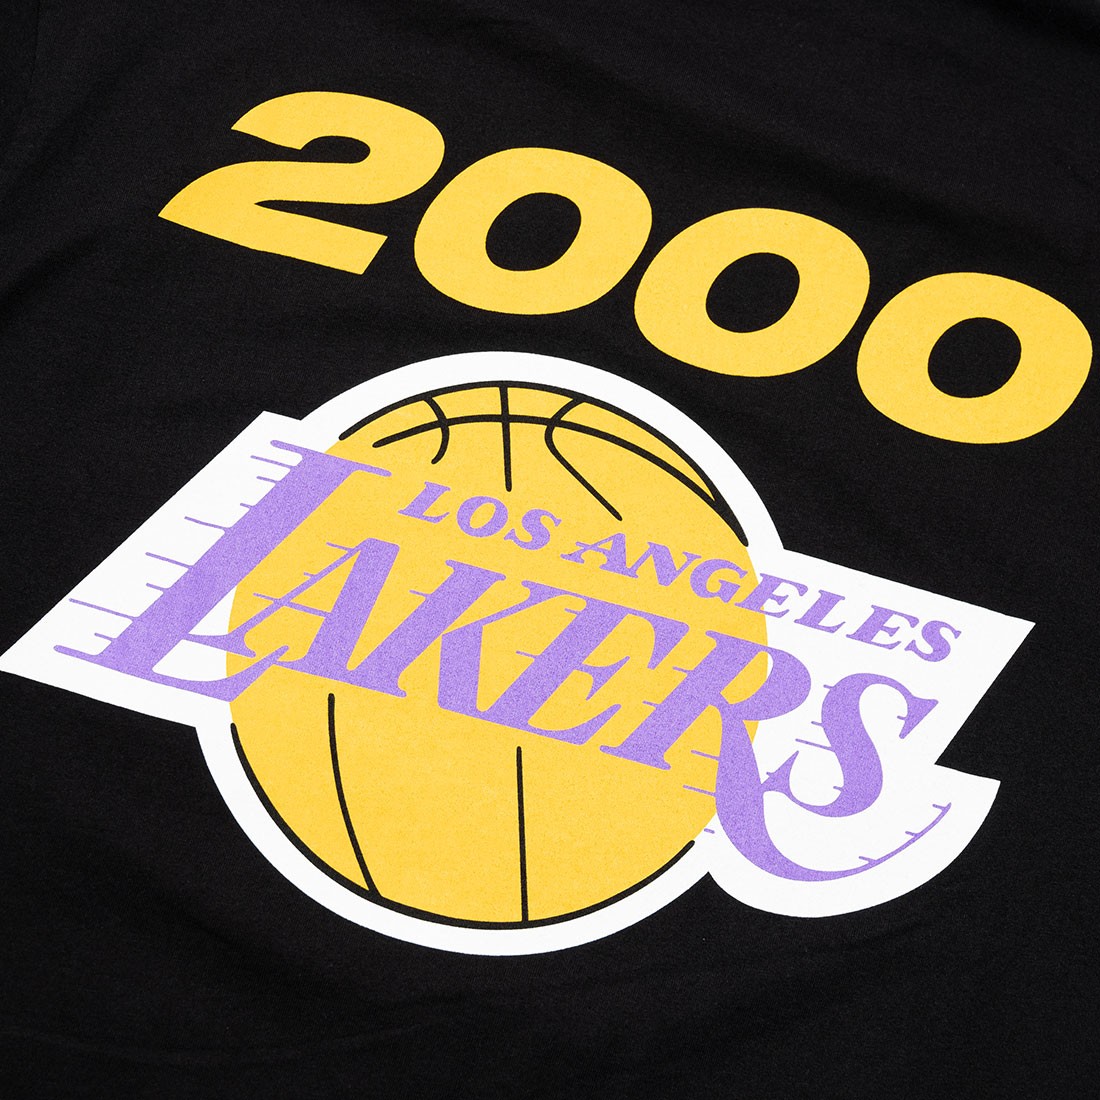 Mitchell And Ness Men NBA Los Angeles Lakers Finals 2001 Tee yellow